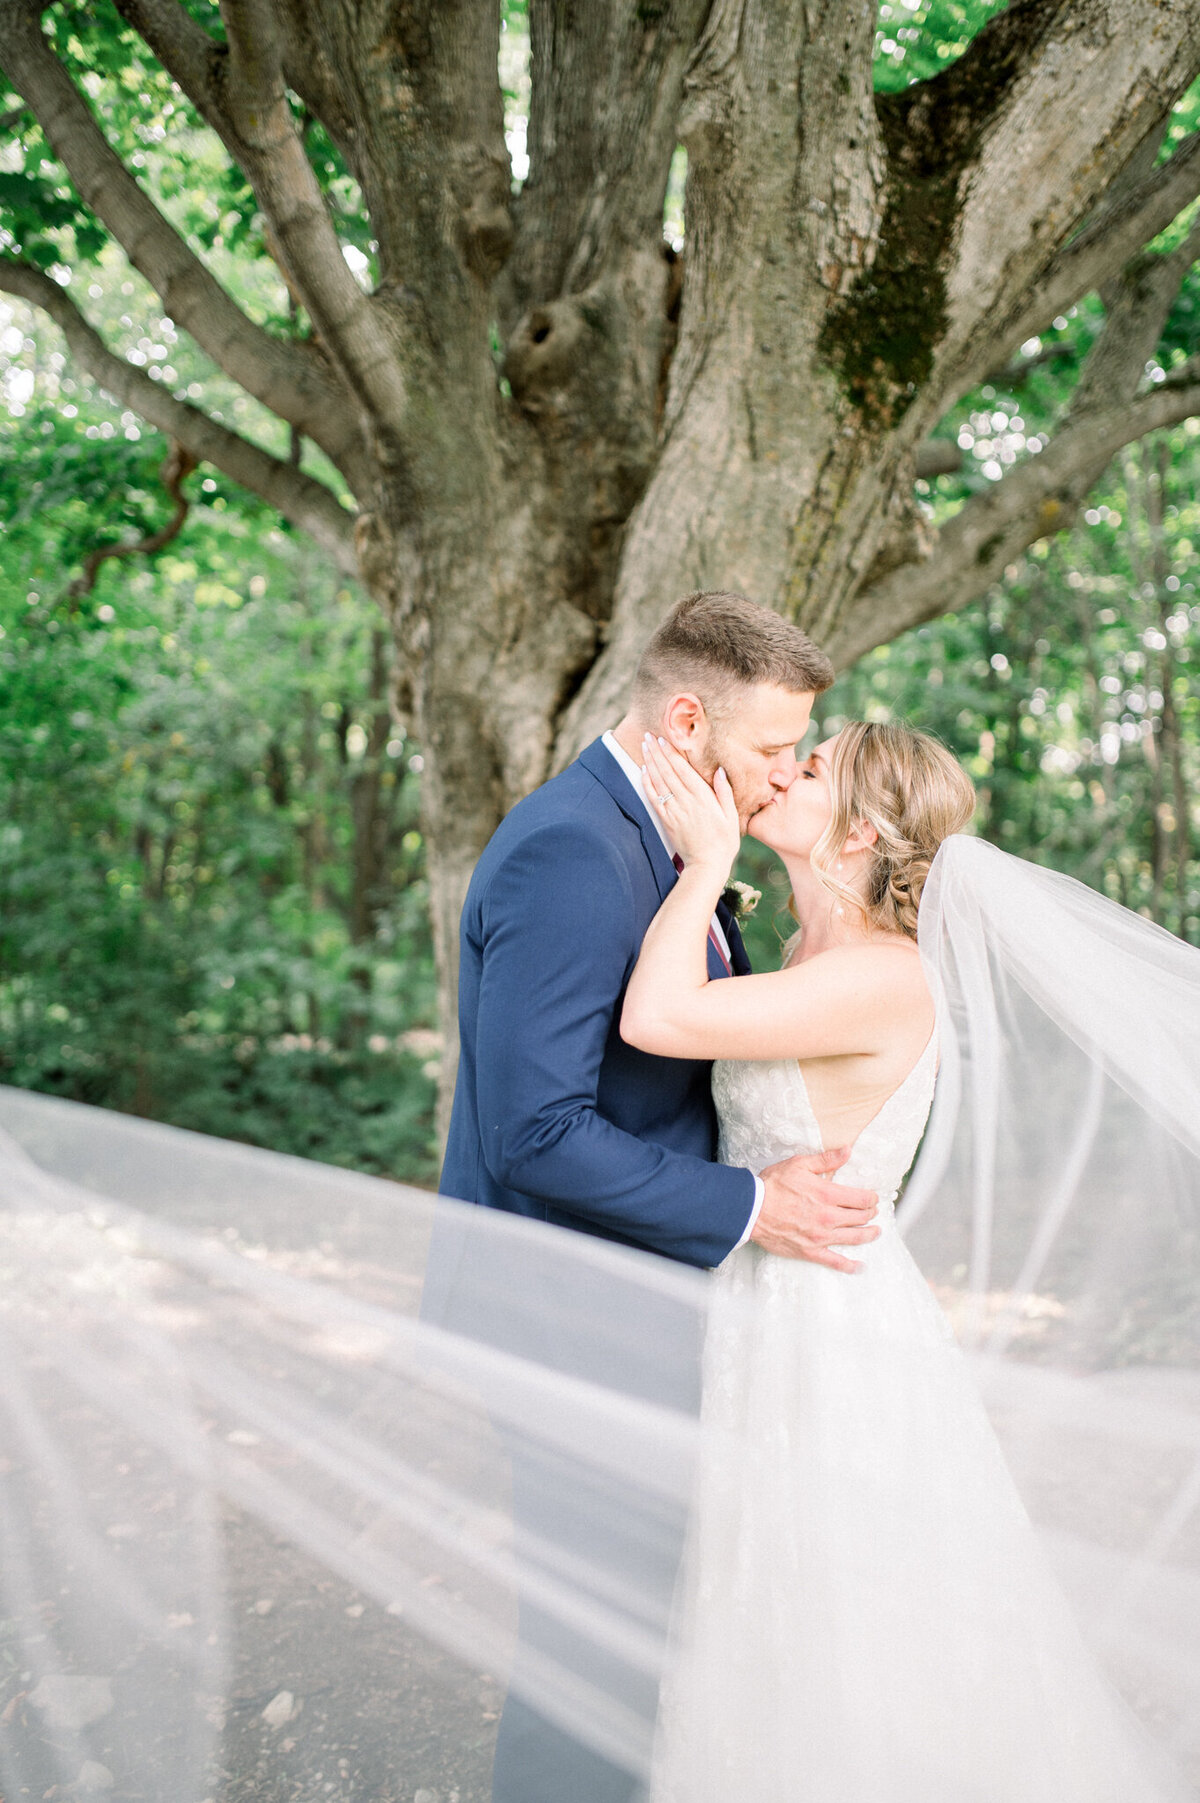 Bride and groom kissing with the veil blowing across the photo captured by Niagara wedding photographer Kristine Marie Photography